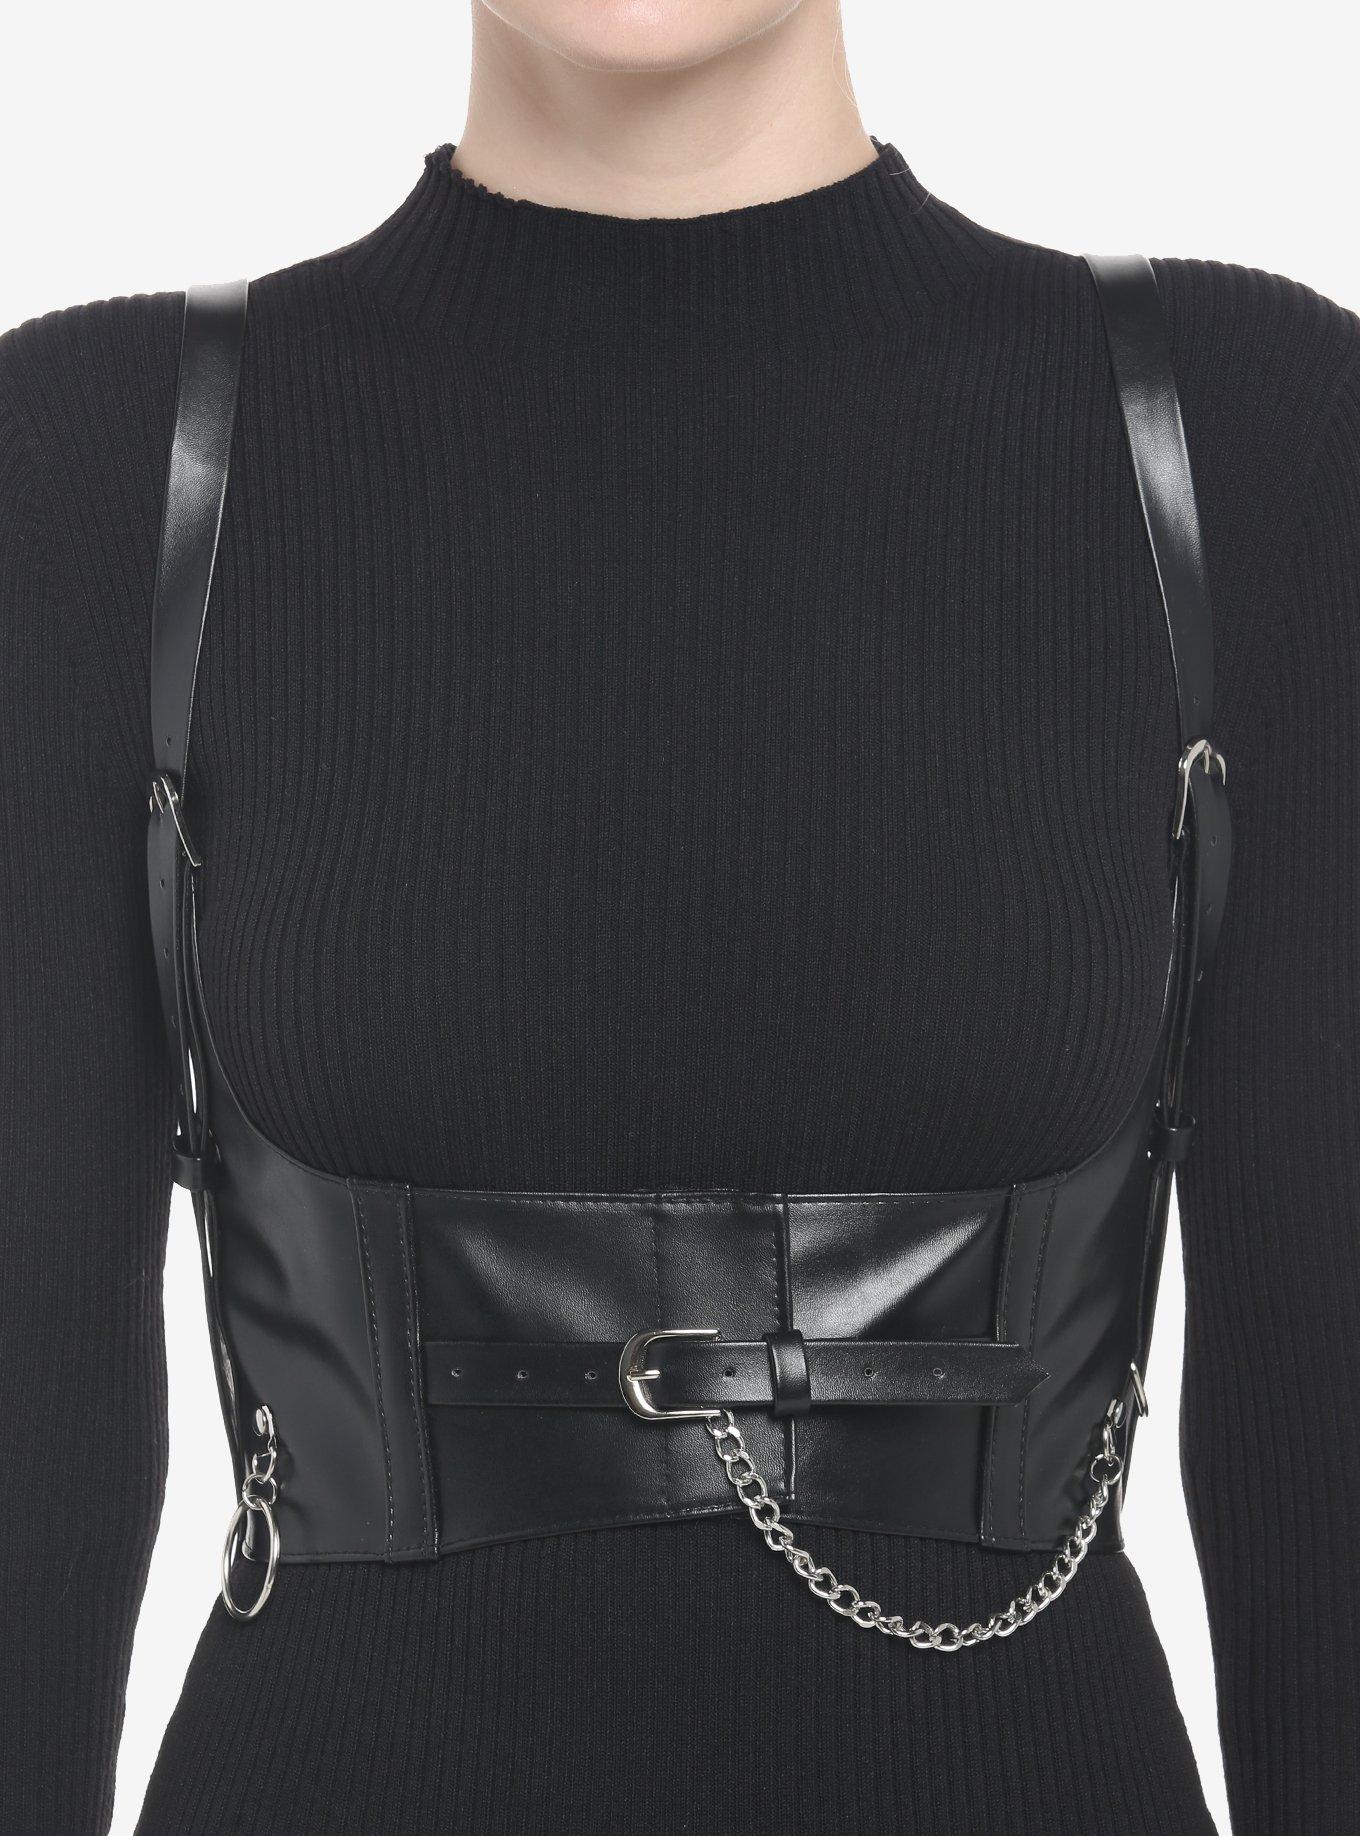 Black Faux Leather Chain Harness | Hot Topic